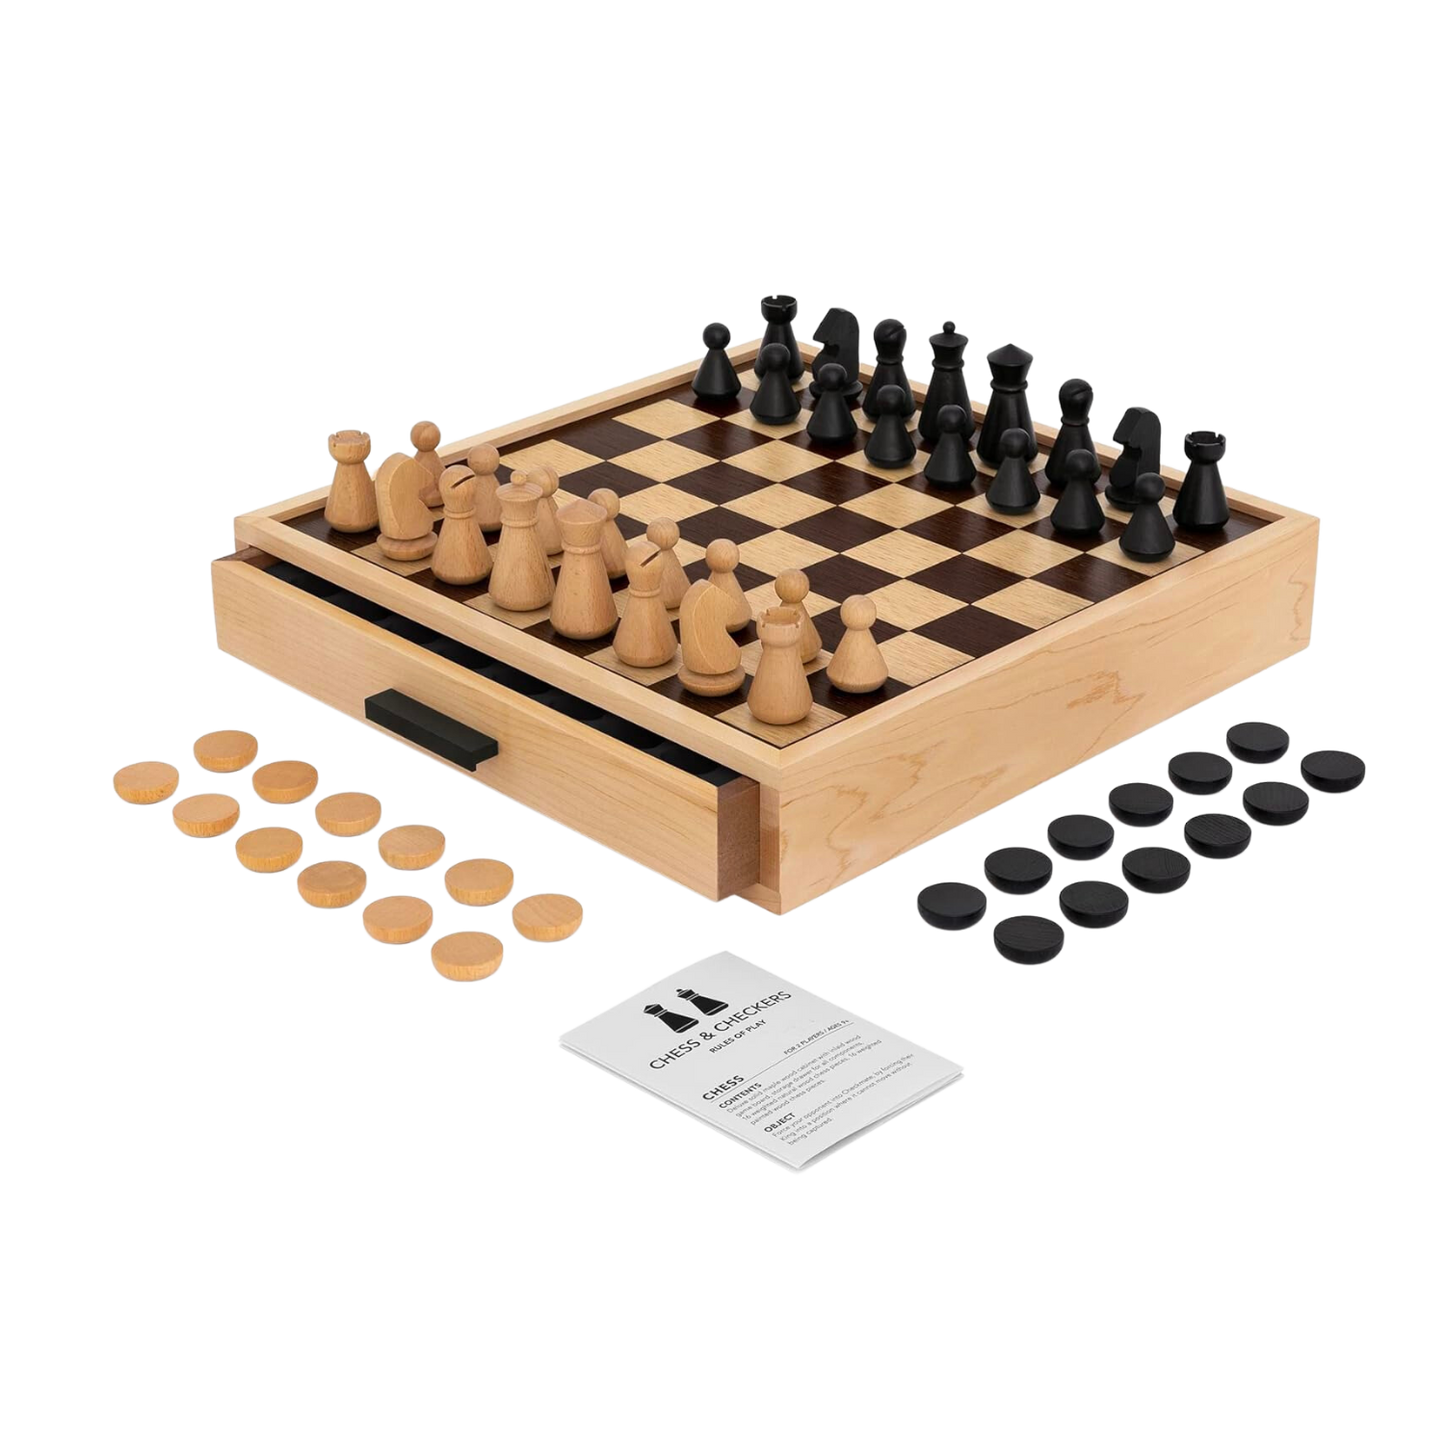 Luxury wooden Chess and Checkers set